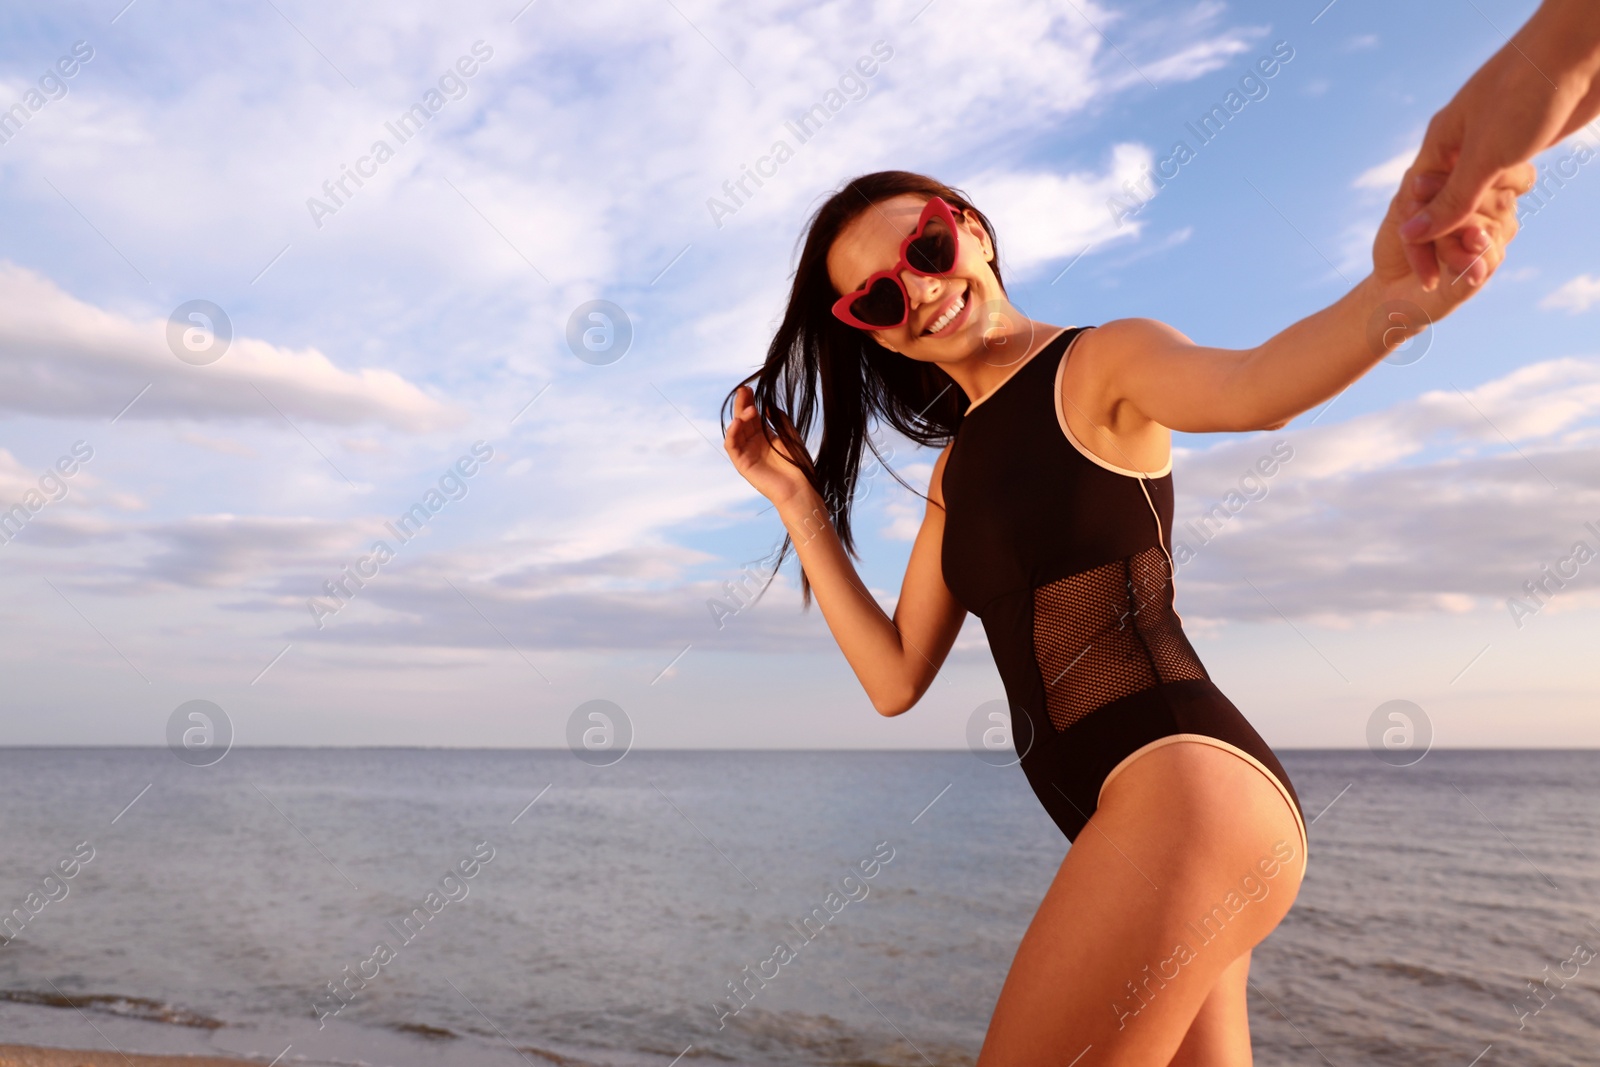 Photo of Young woman holding hands with girlfriend on beach